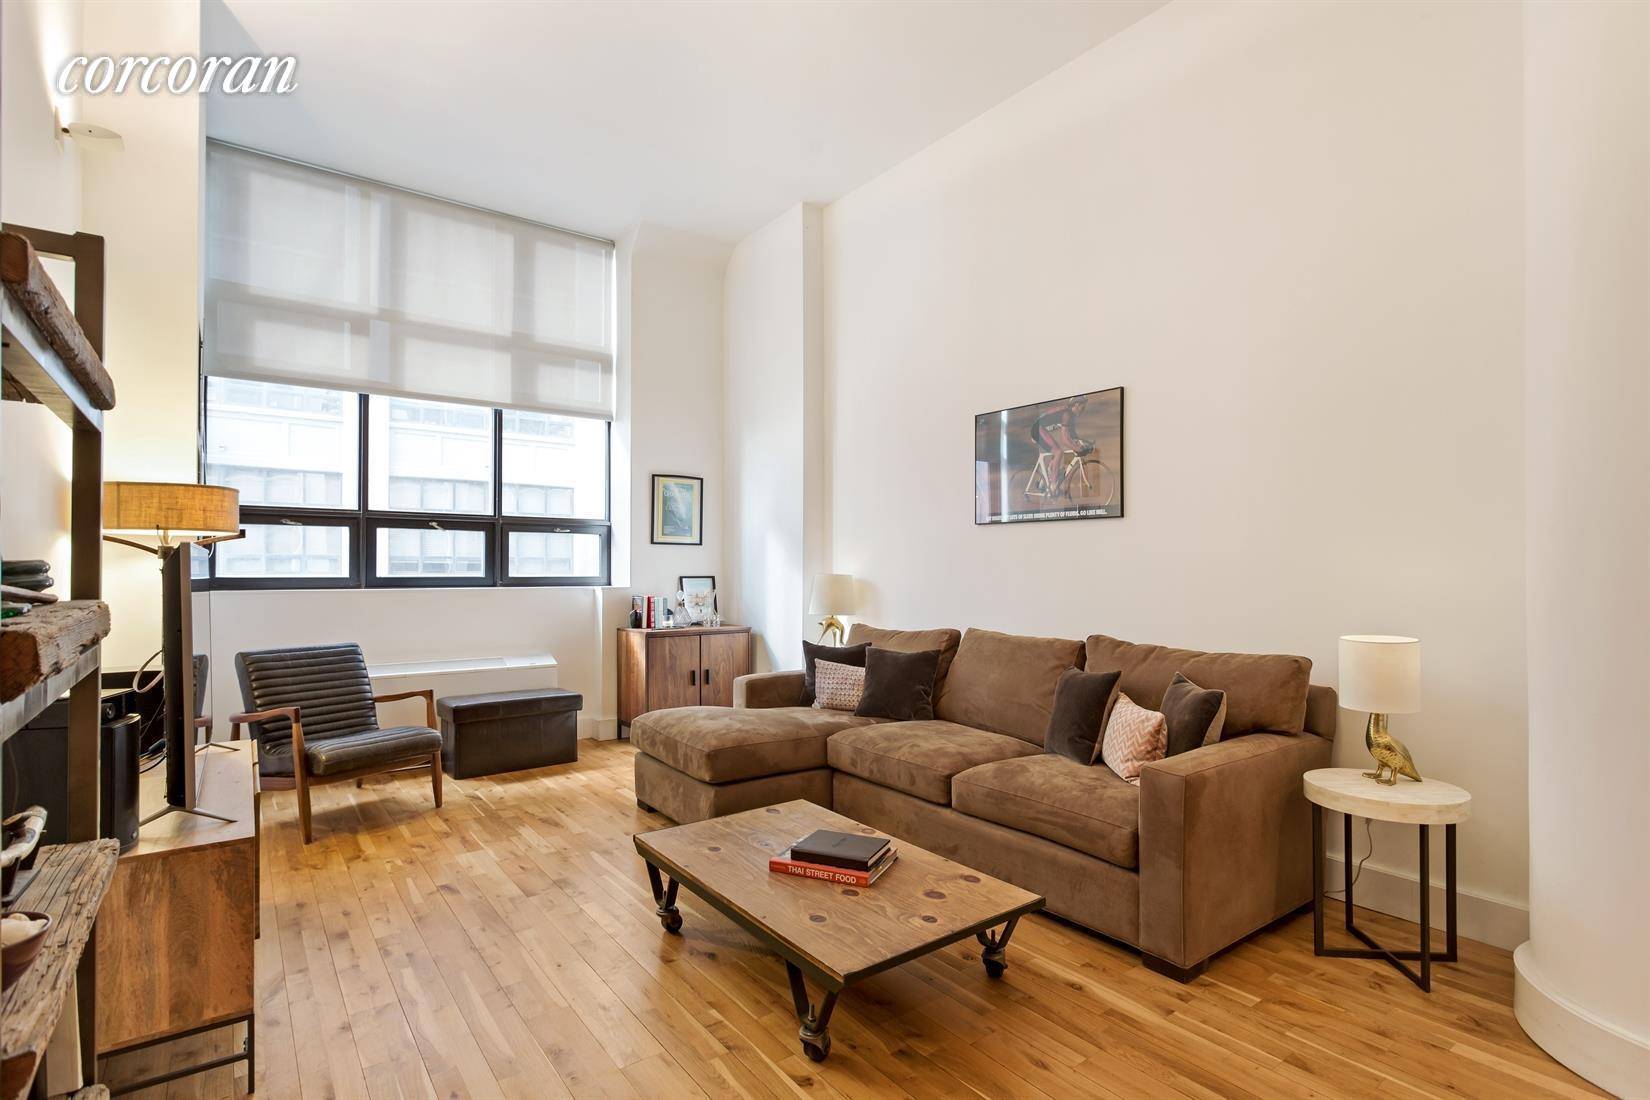 Application Pending Approval Welcome to OBB Unit 503, a wonderful bright and spacious one bedroom apartment with the perfect floor plan and courtyard views.